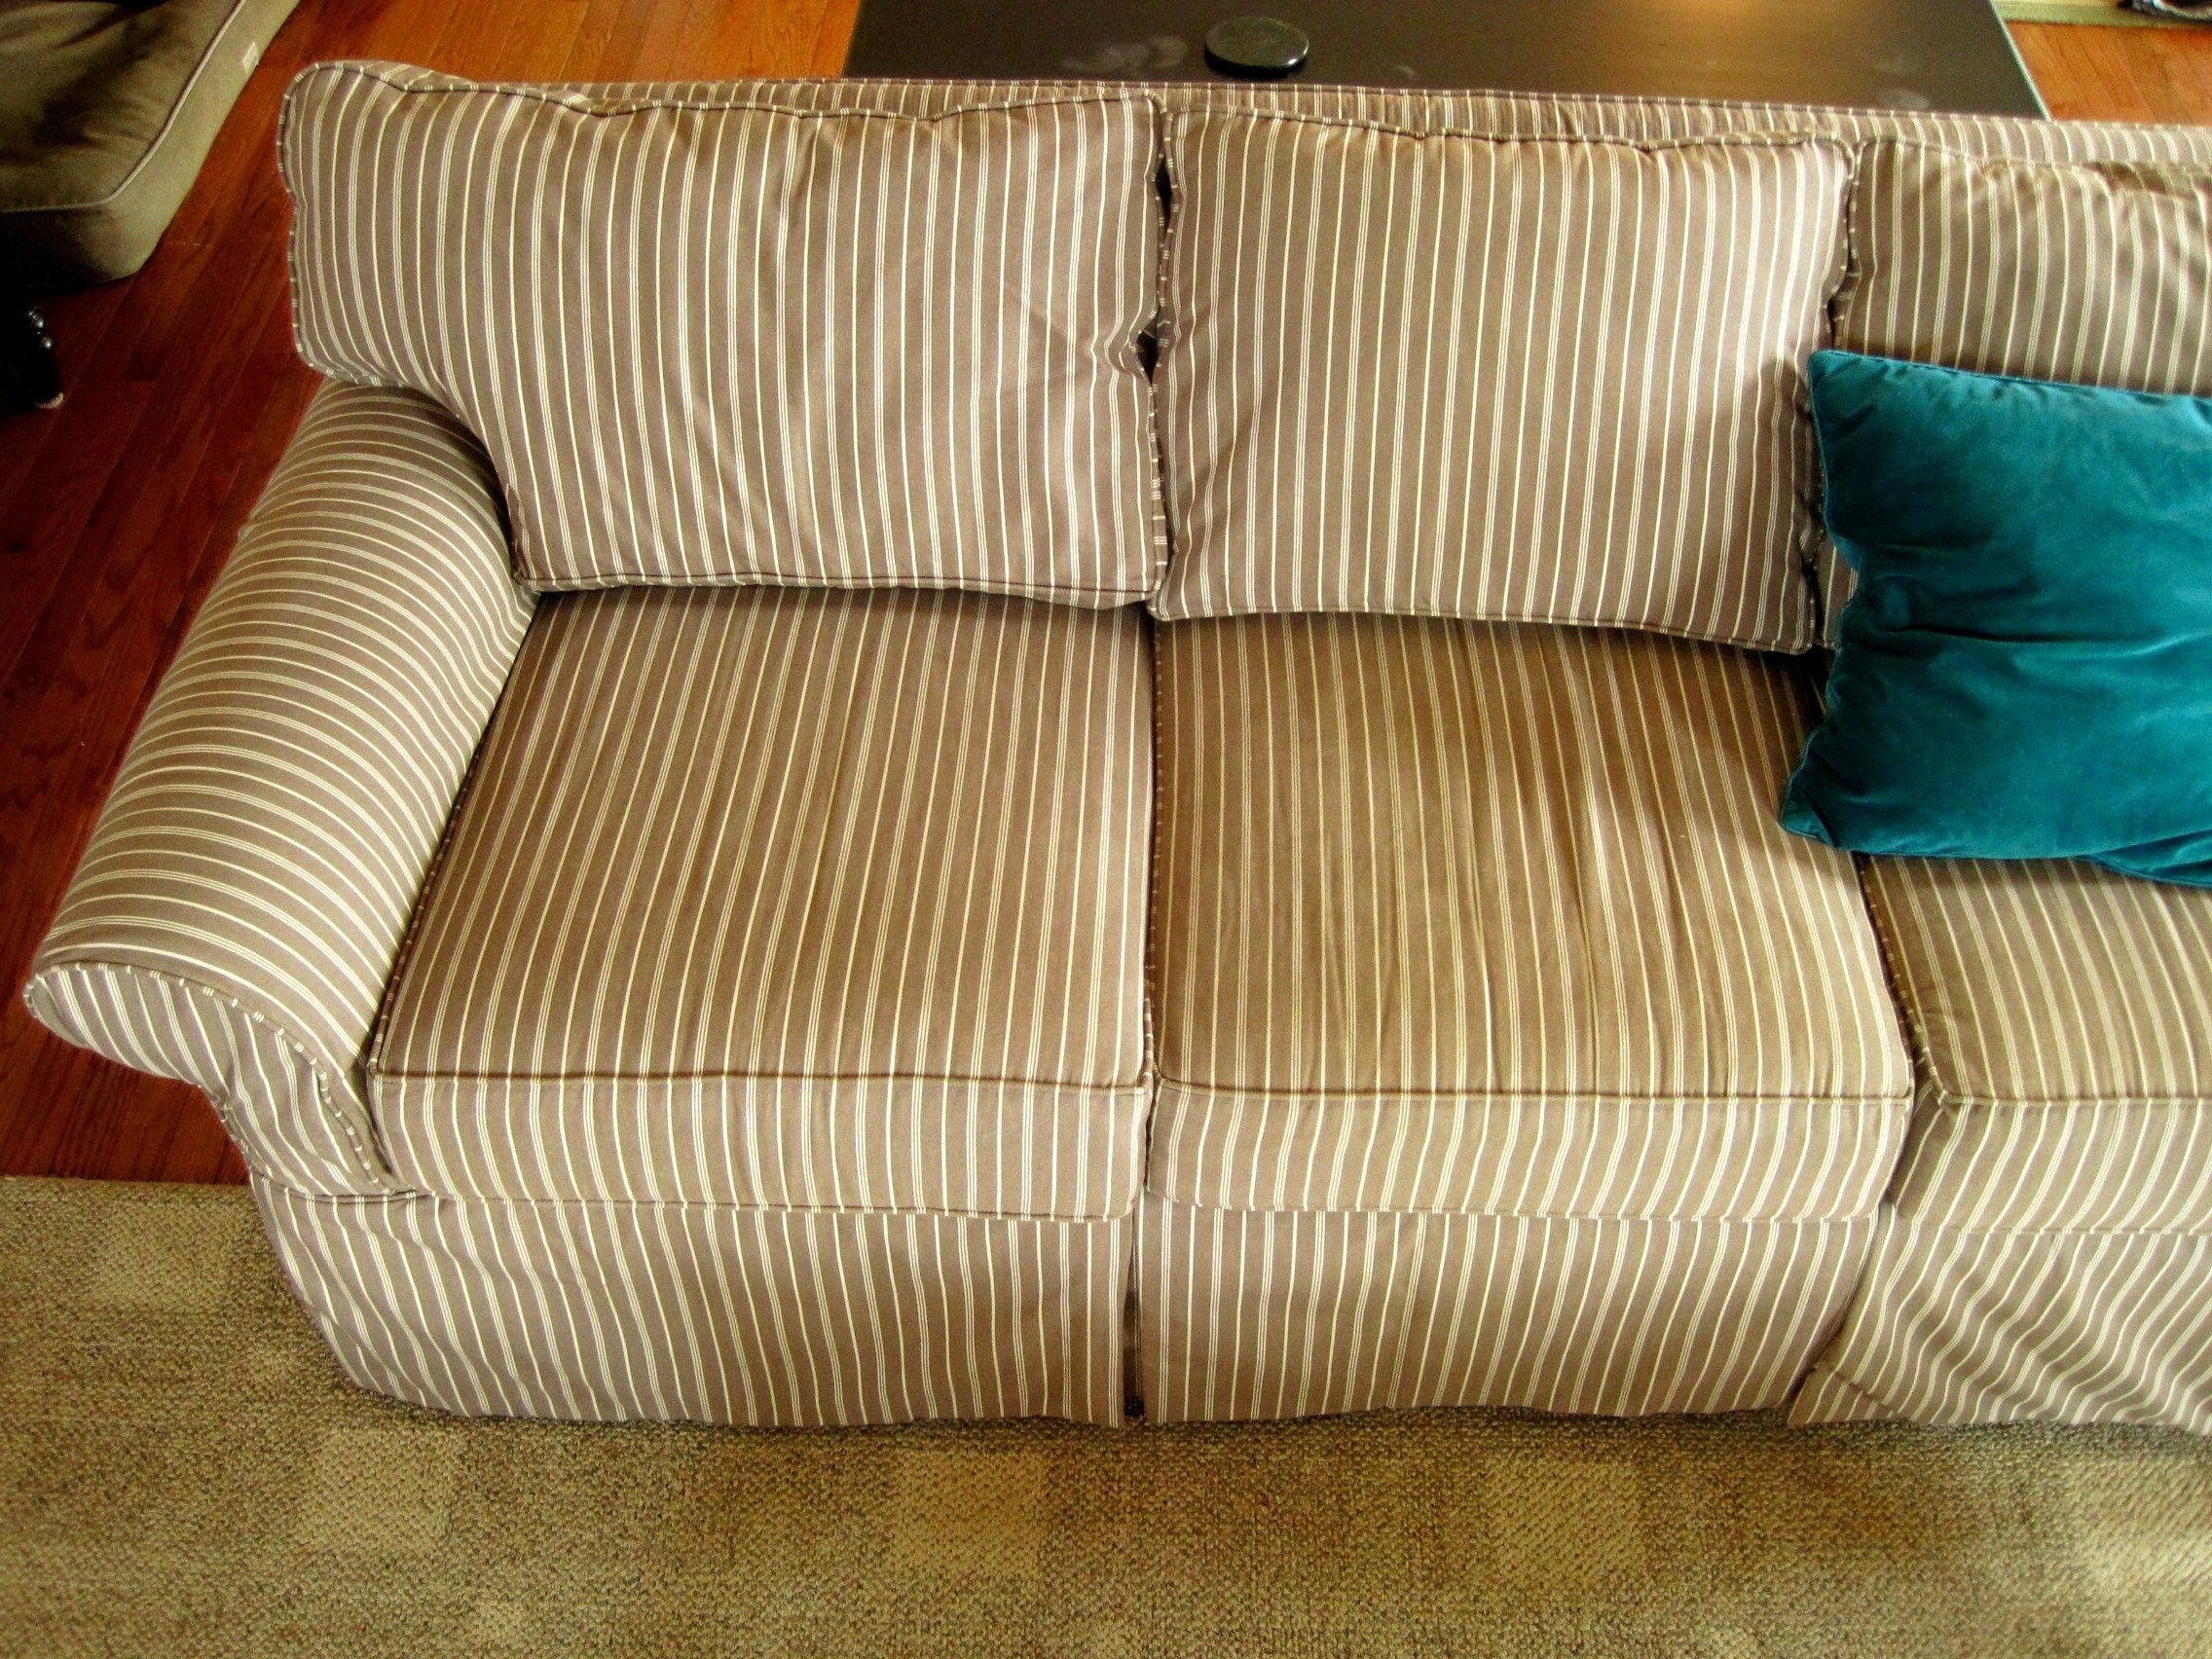 Latest Striped Sofas And Chairs Inside Sofa : Sofa Seat Cushions Unique Furniture Rug Charming Slipcovers (View 13 of 20)